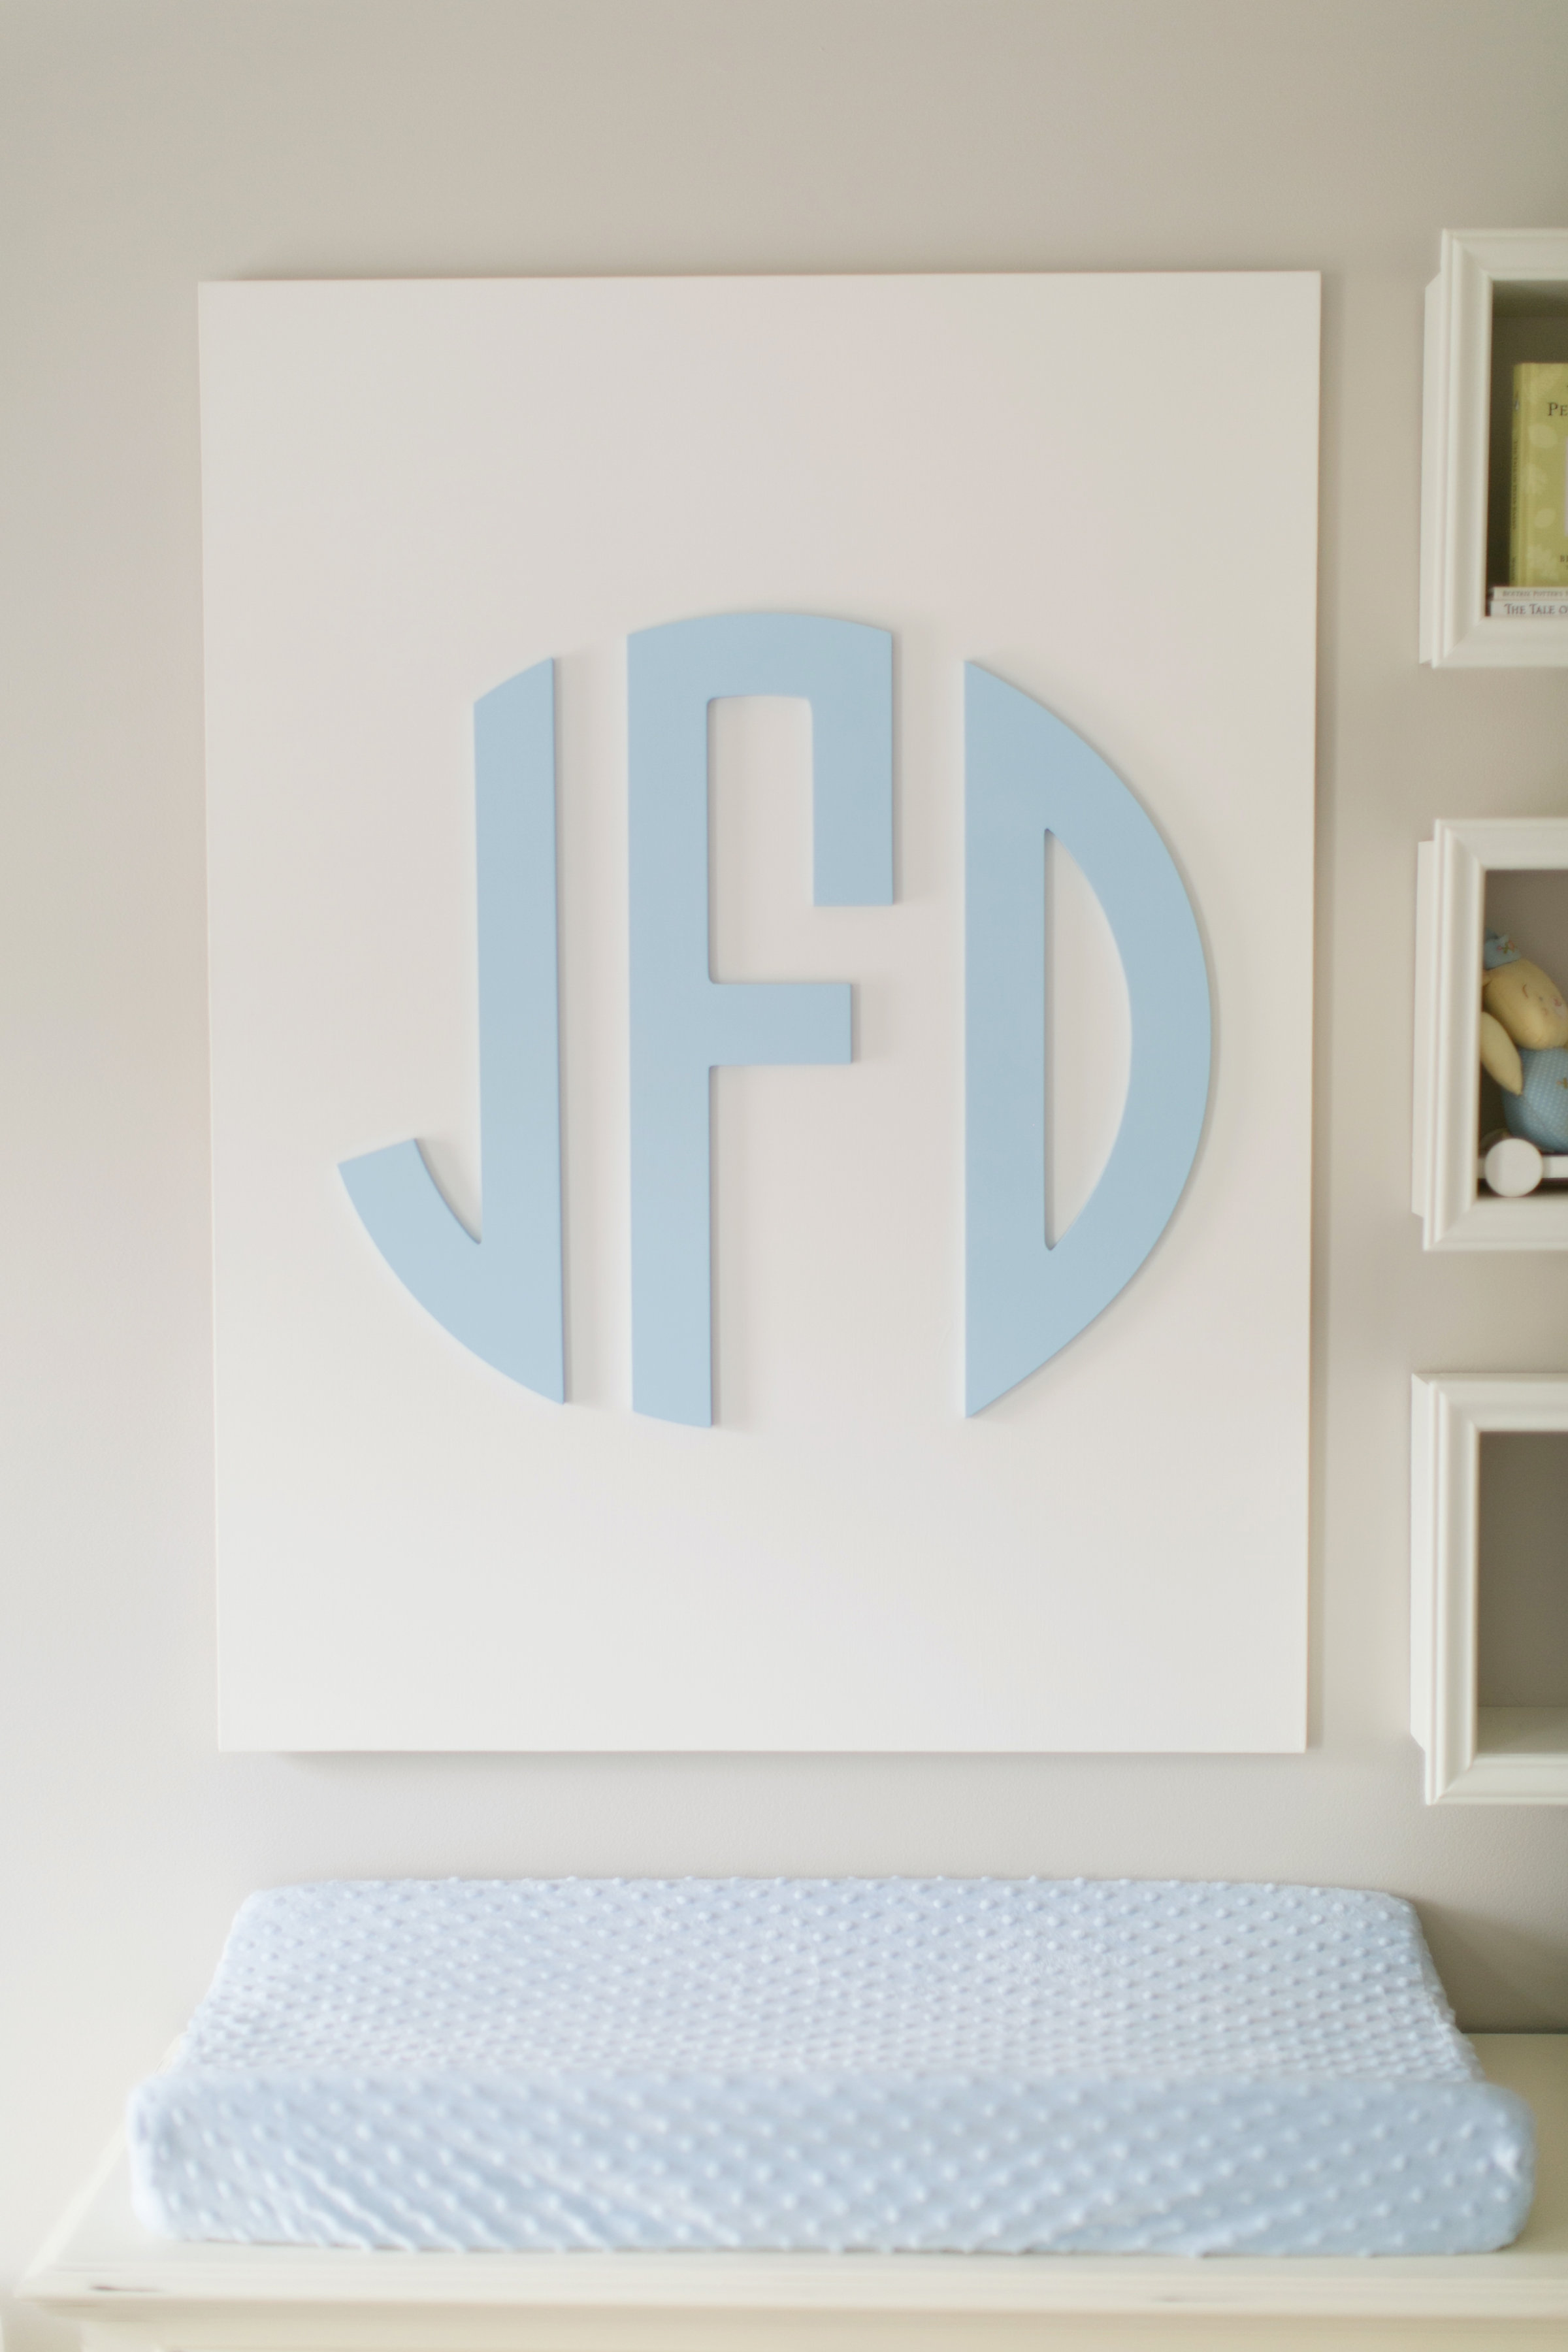 custom wood monogram wall decor hanging above a changing pad in a nursery room 